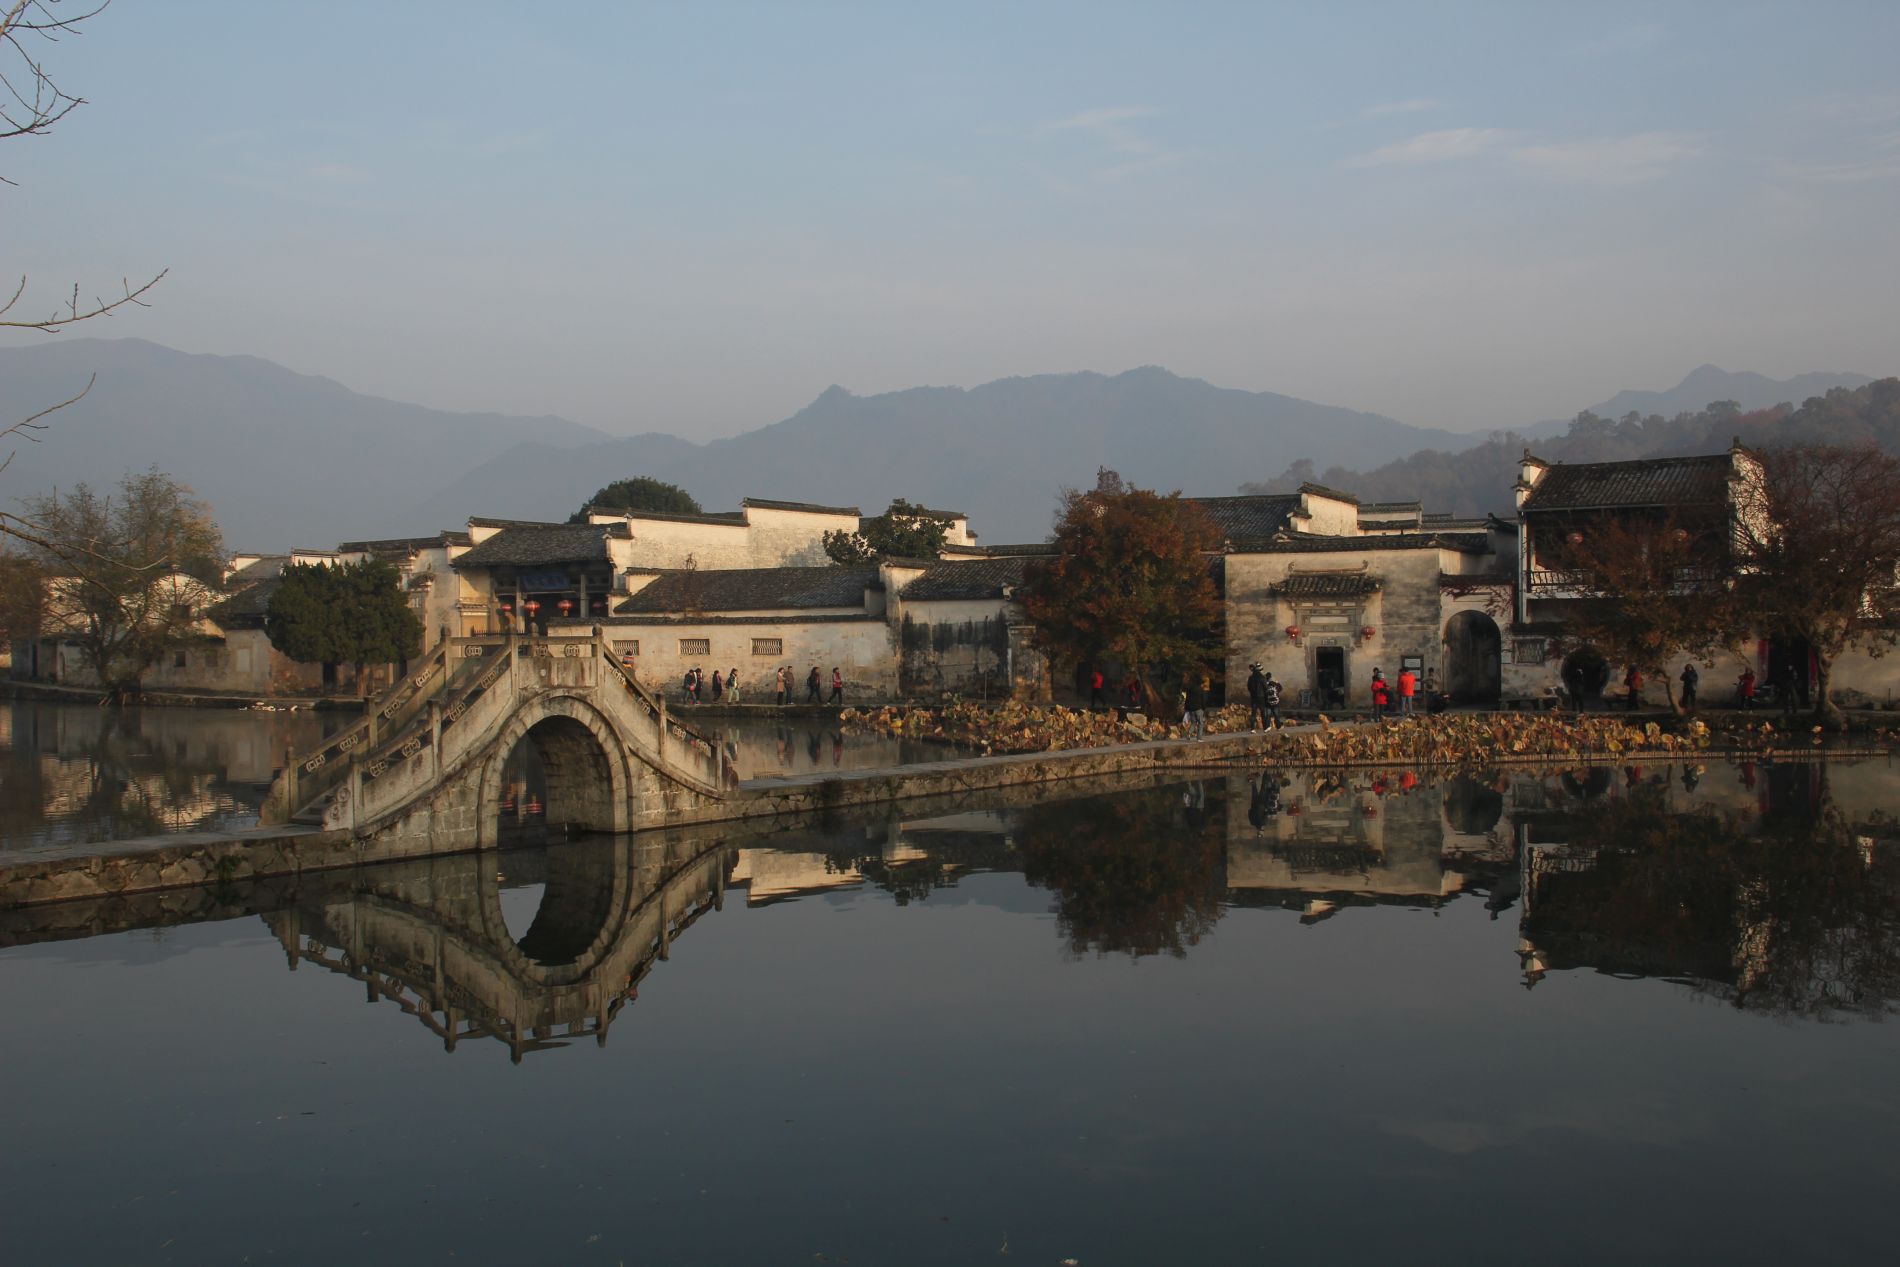 The bridge across Hongcun's South Lake was featured in the opening scene of Crouching Tiger, Hidden Dragon.